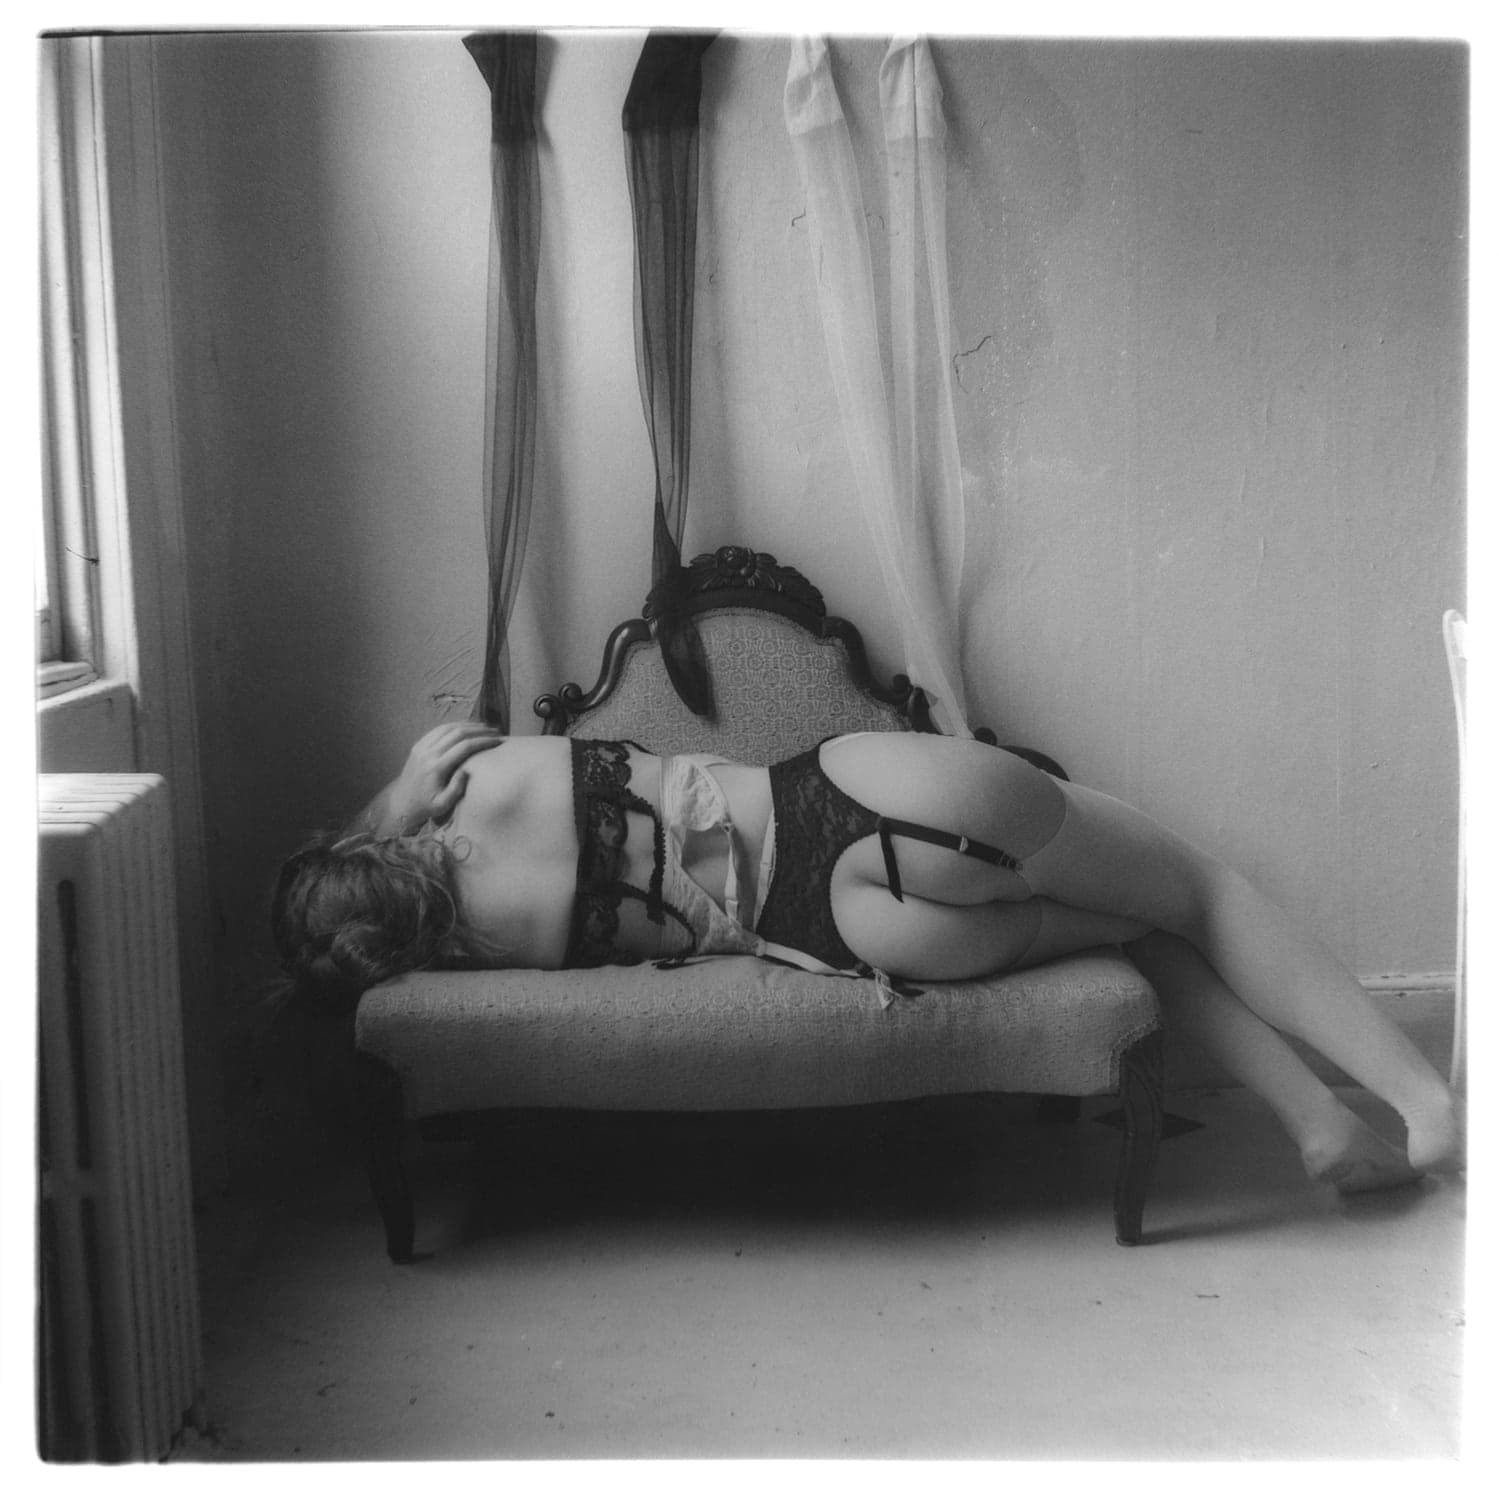 Black and white figure of a figure from behind dressed in lingerie, reclining on a couch by a window.